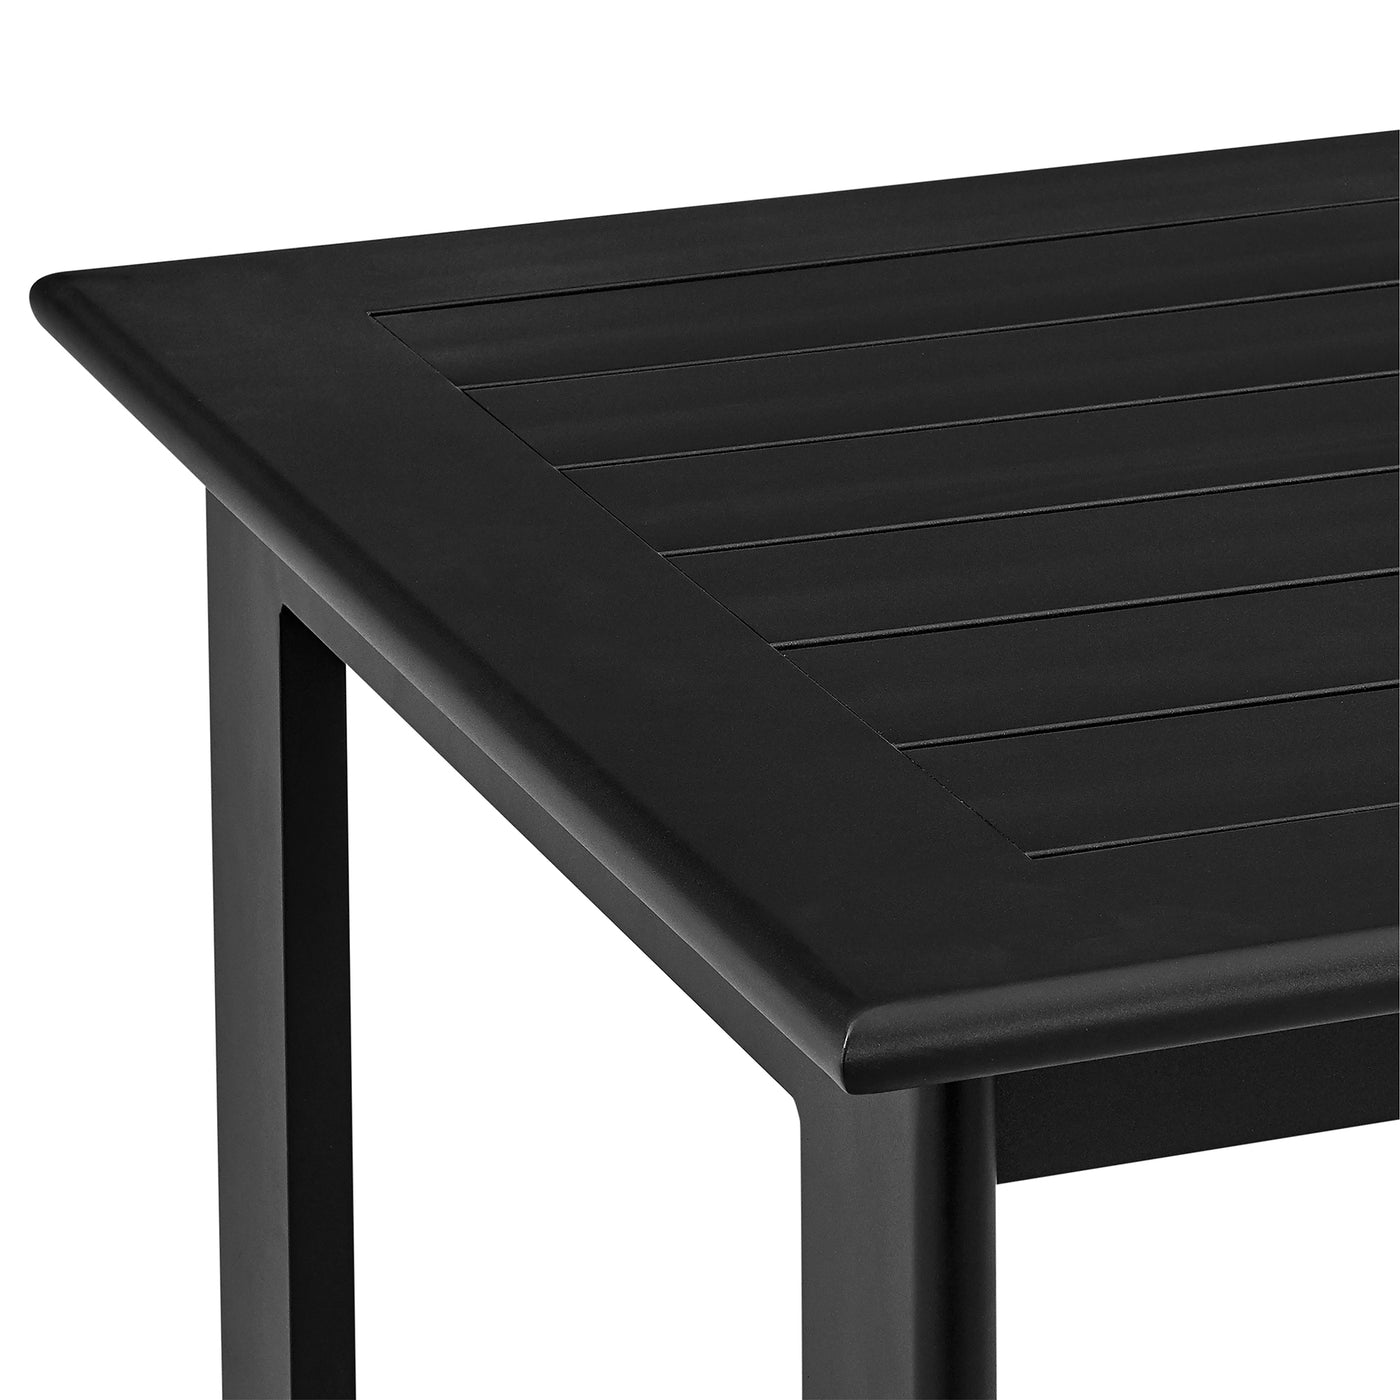 Cayman Outdoor Counter Table